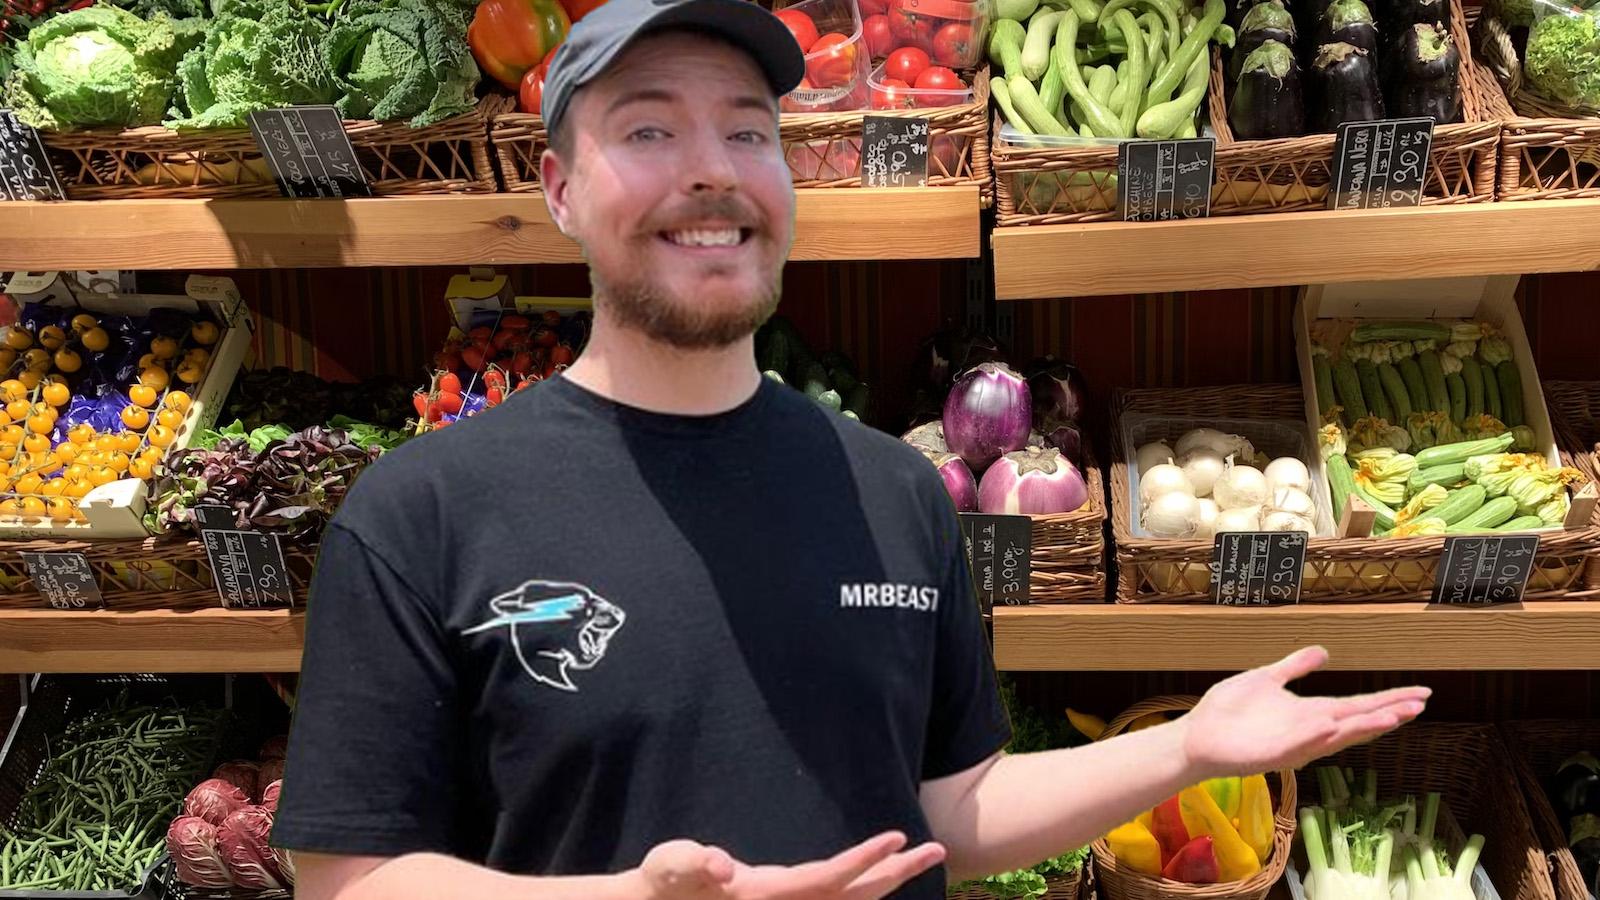 MrBeast fears going broke after making insane promise to man in grocery store